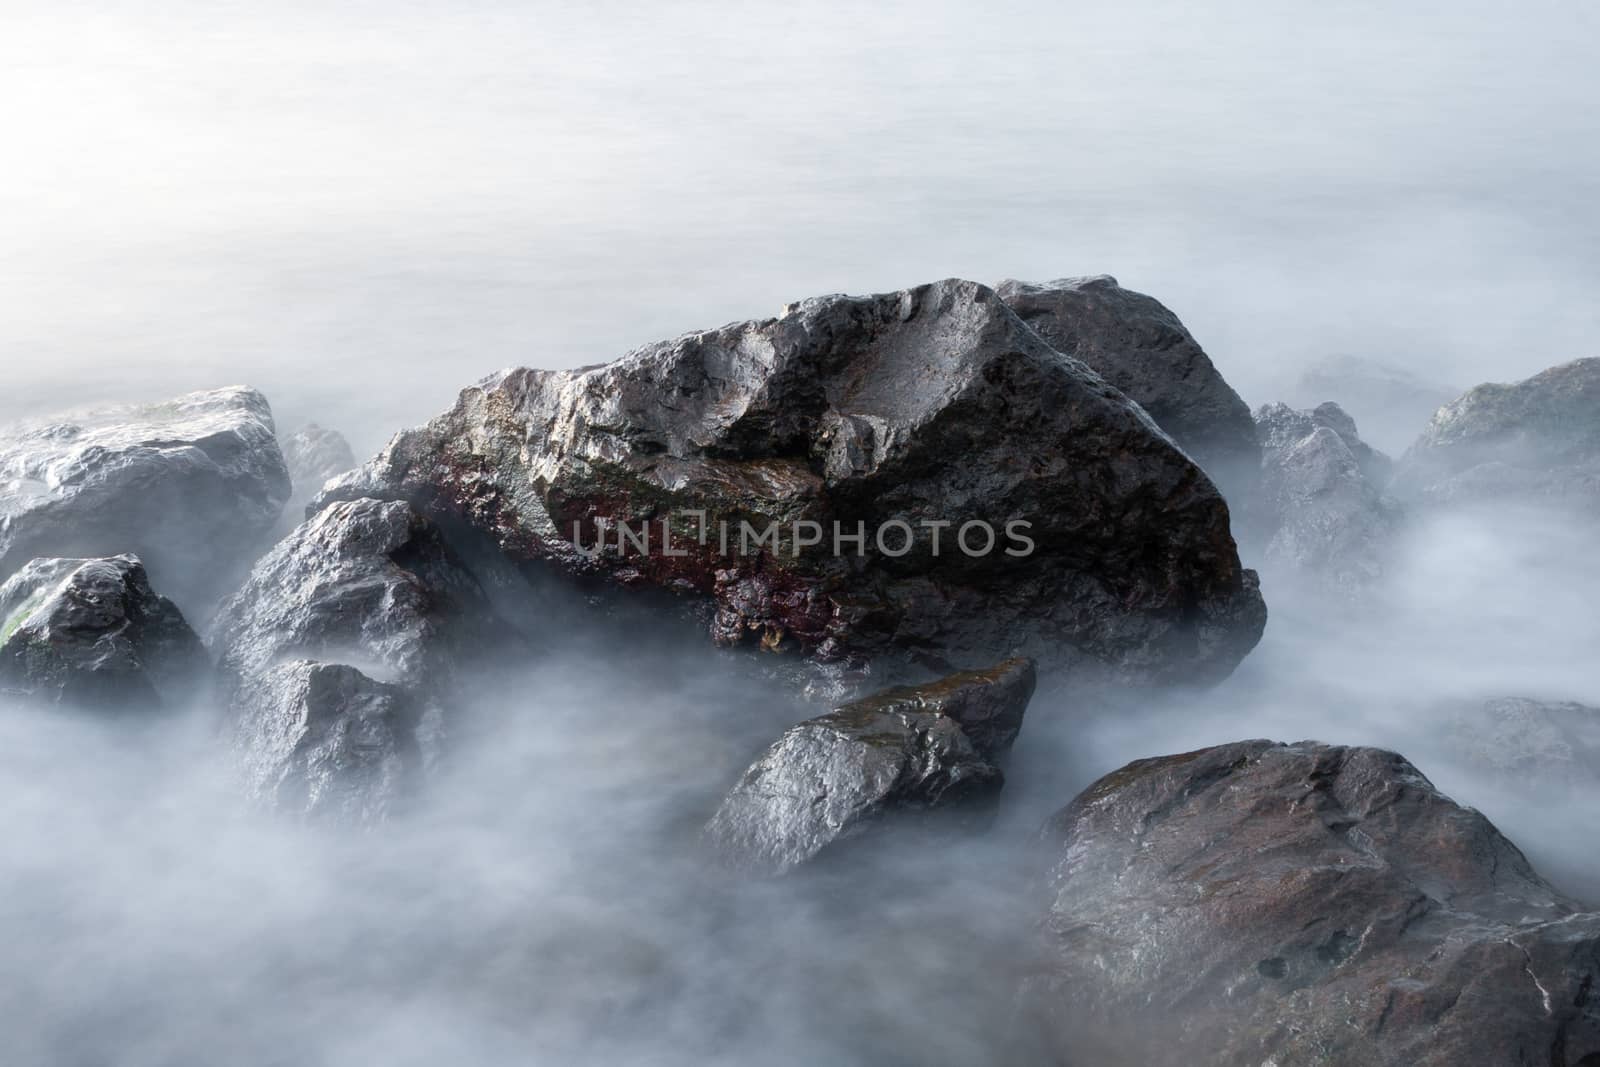 long exposure of sea rocks in the morning